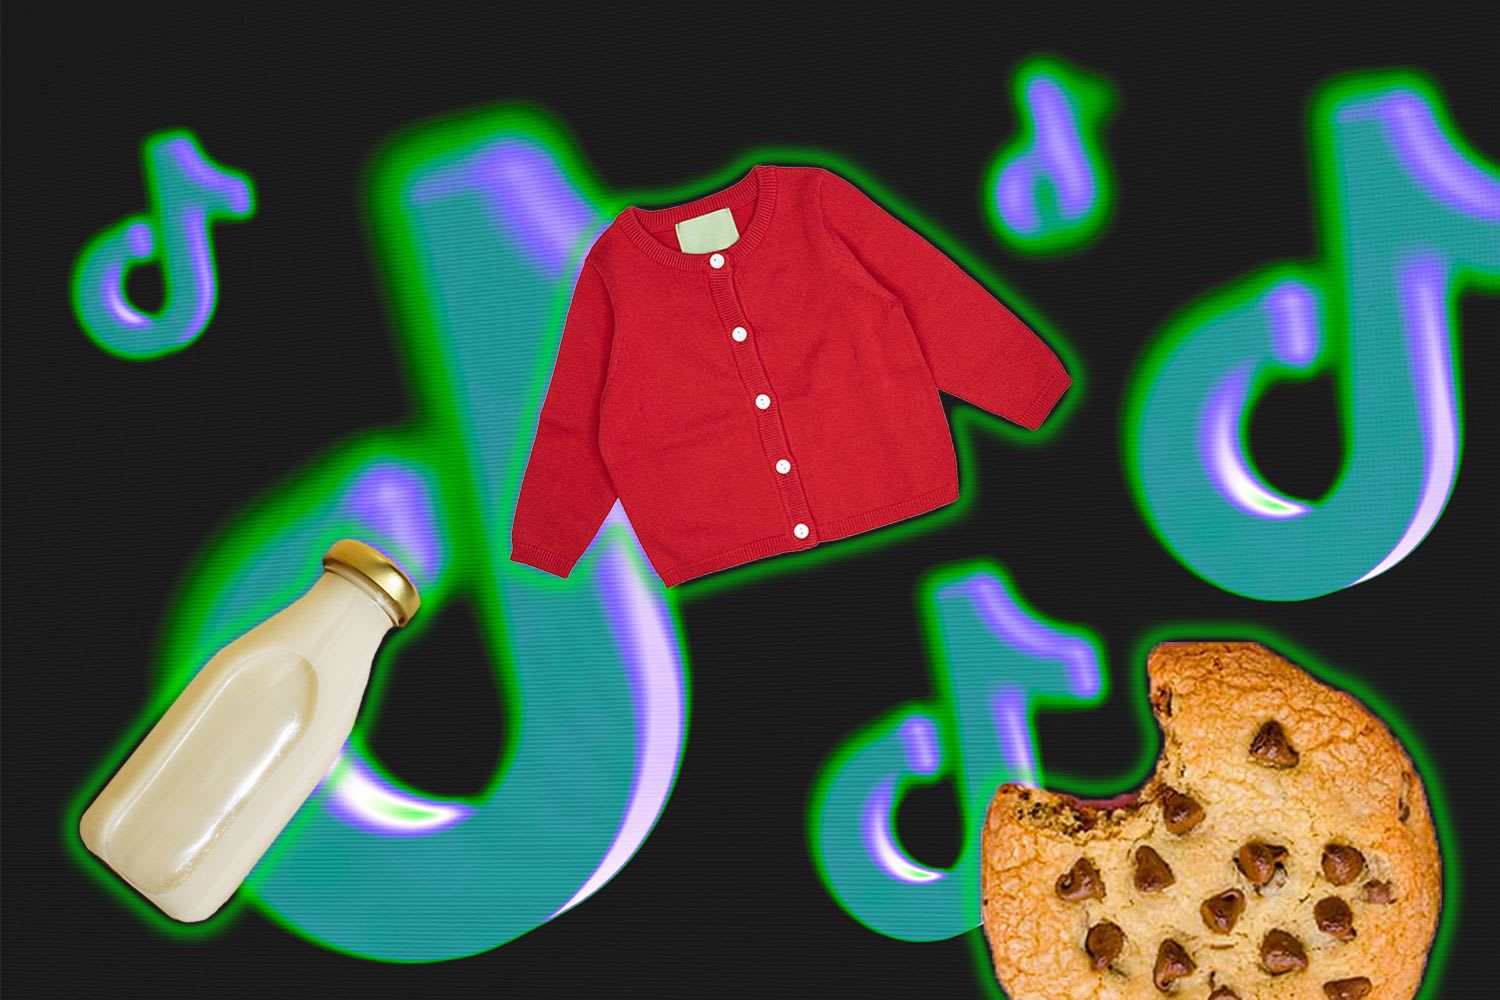 A red jacket and a bottle of milk and cookies